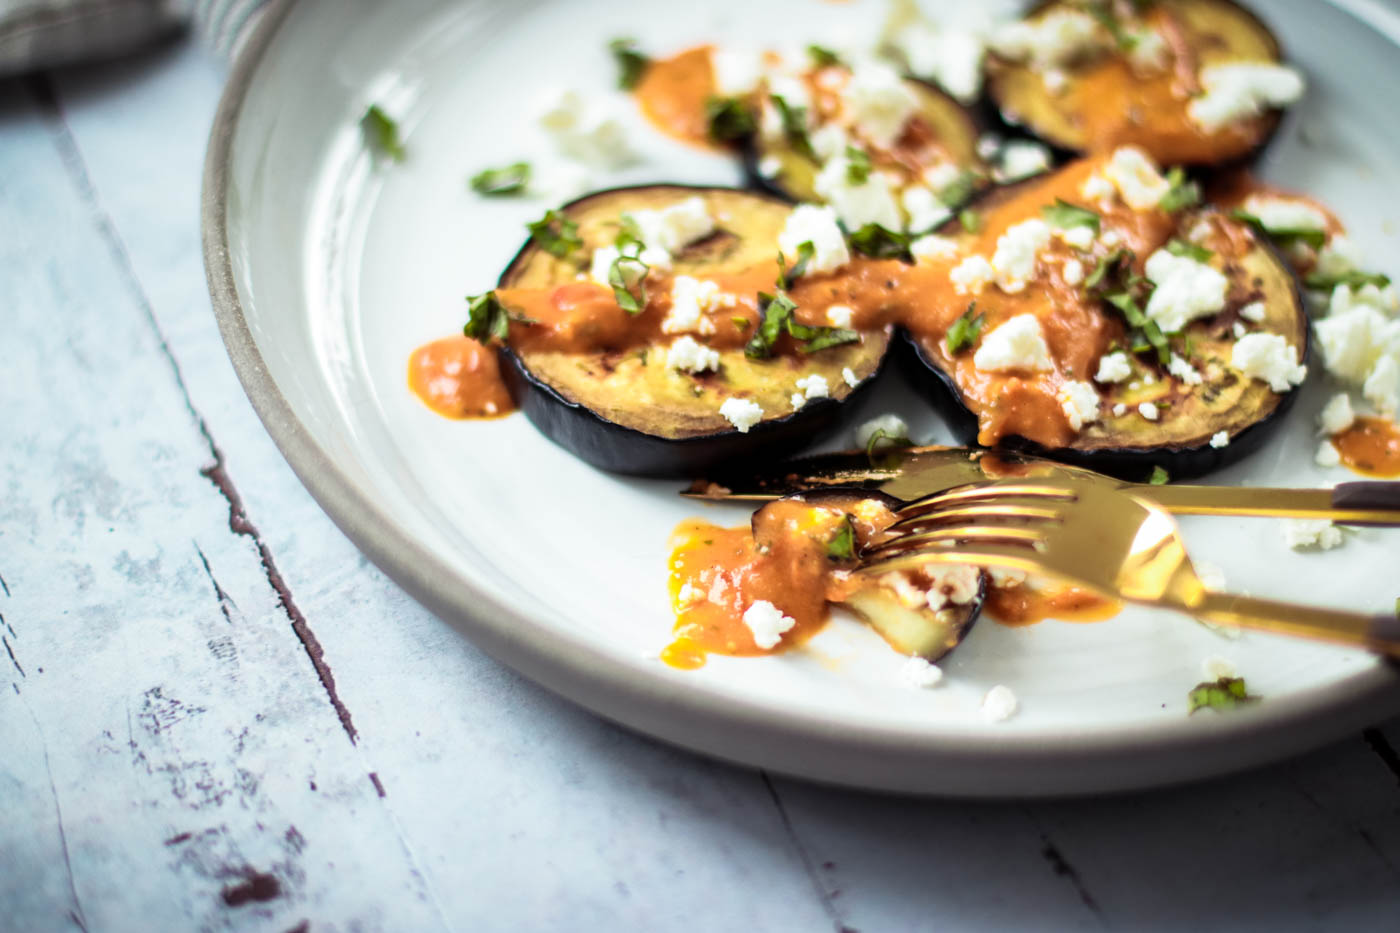 Easy Summer Lunch Grilled Eggplant with Tomato Sauce, Basil and Feta Cheese